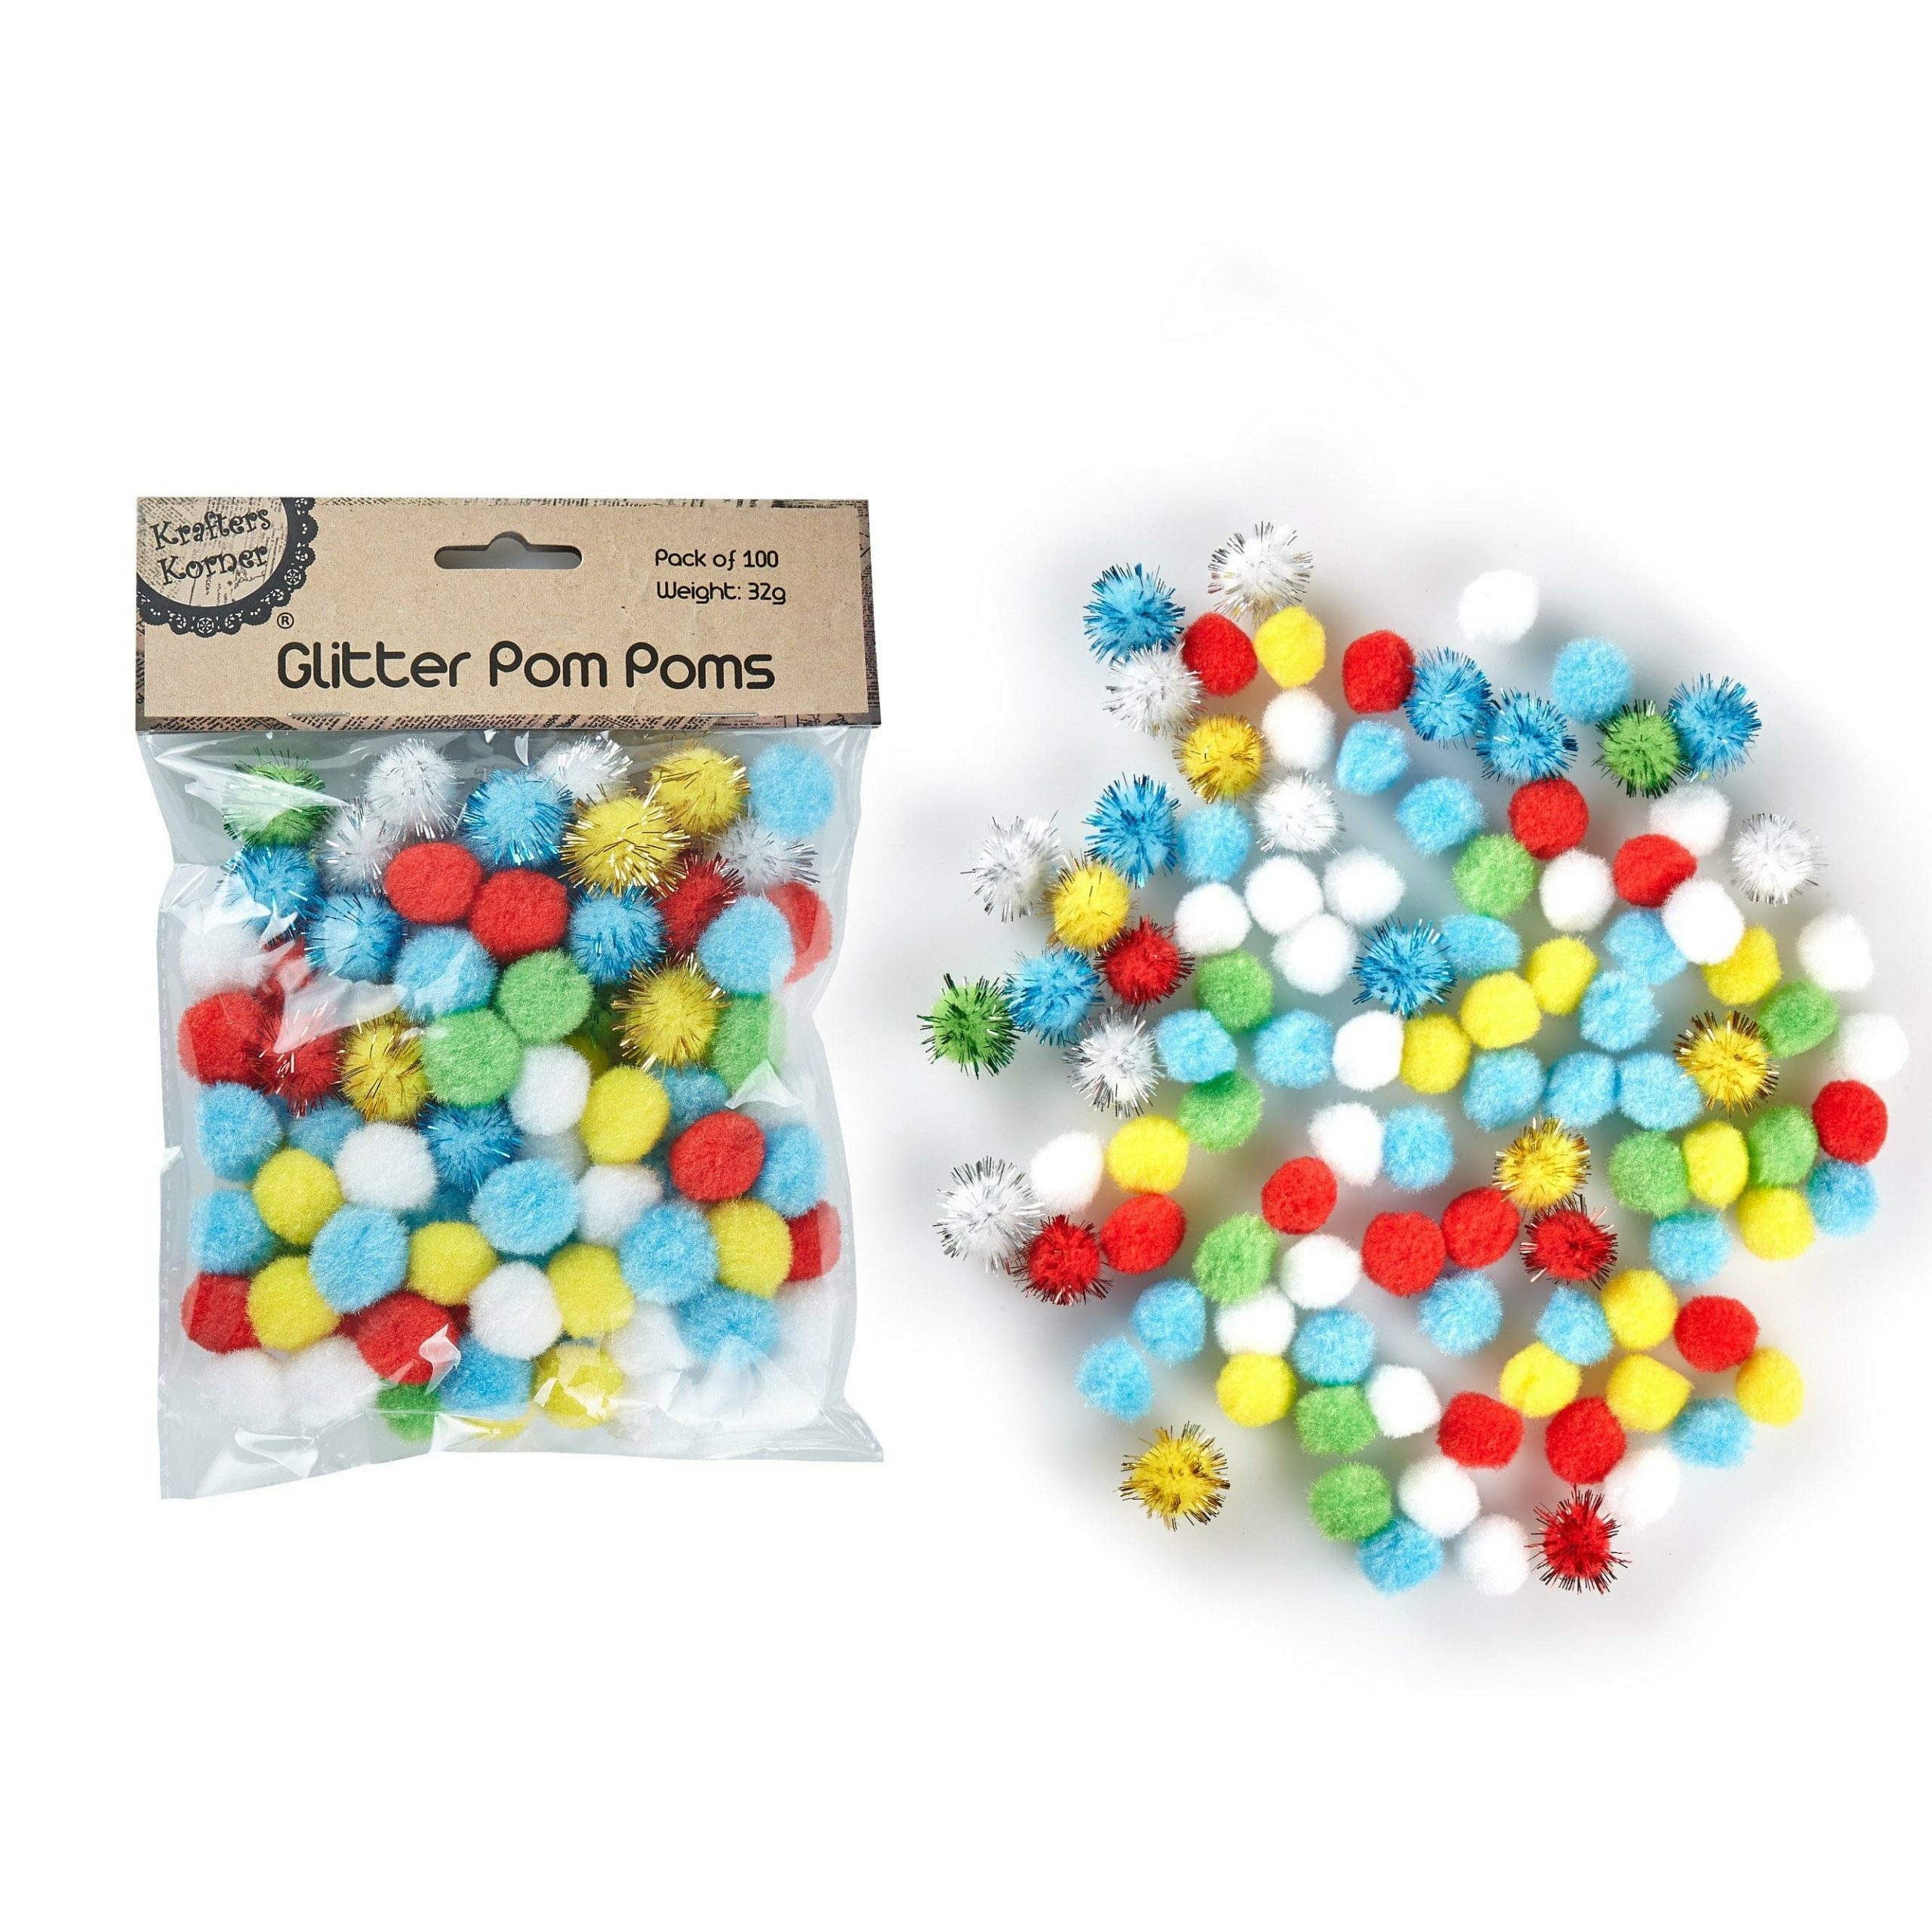 The newest Krafters Korner Glitter Pom Poms 32 Grams, 100 Pieces Jem is now  available for purchase for sale at an affordable price